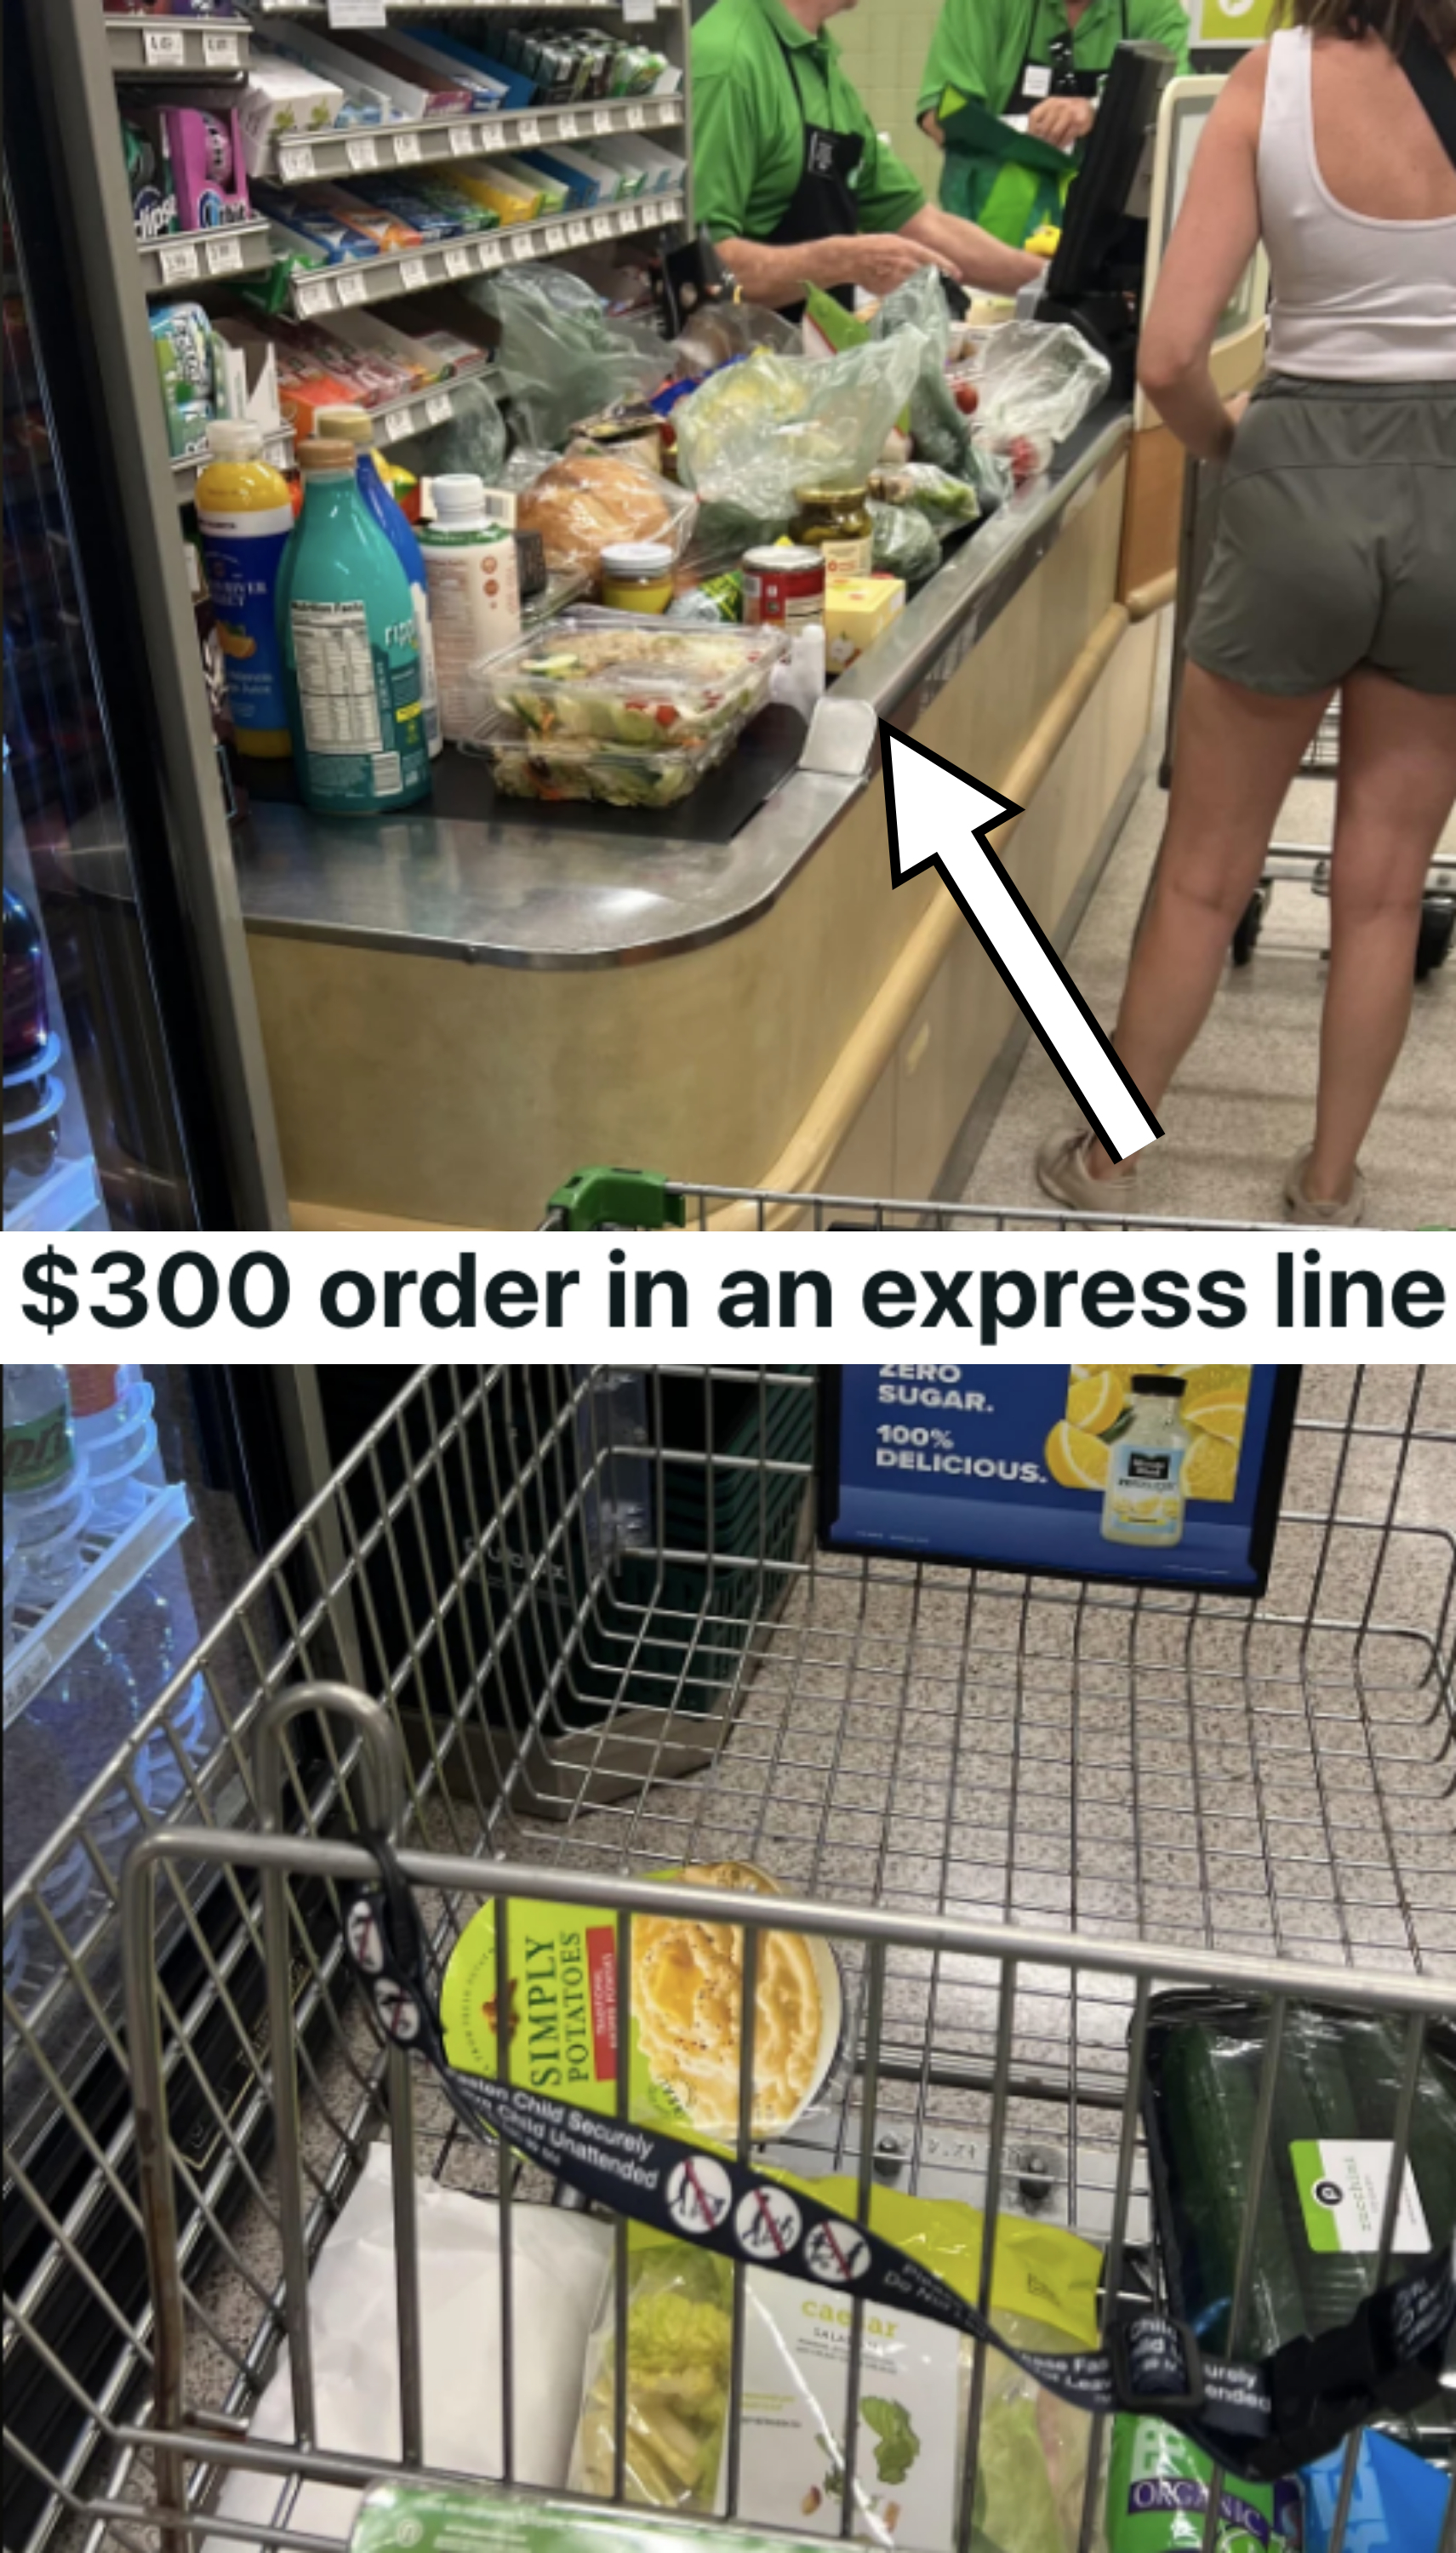 Arrow pointing to someone&#x27;s groceries in the express lane